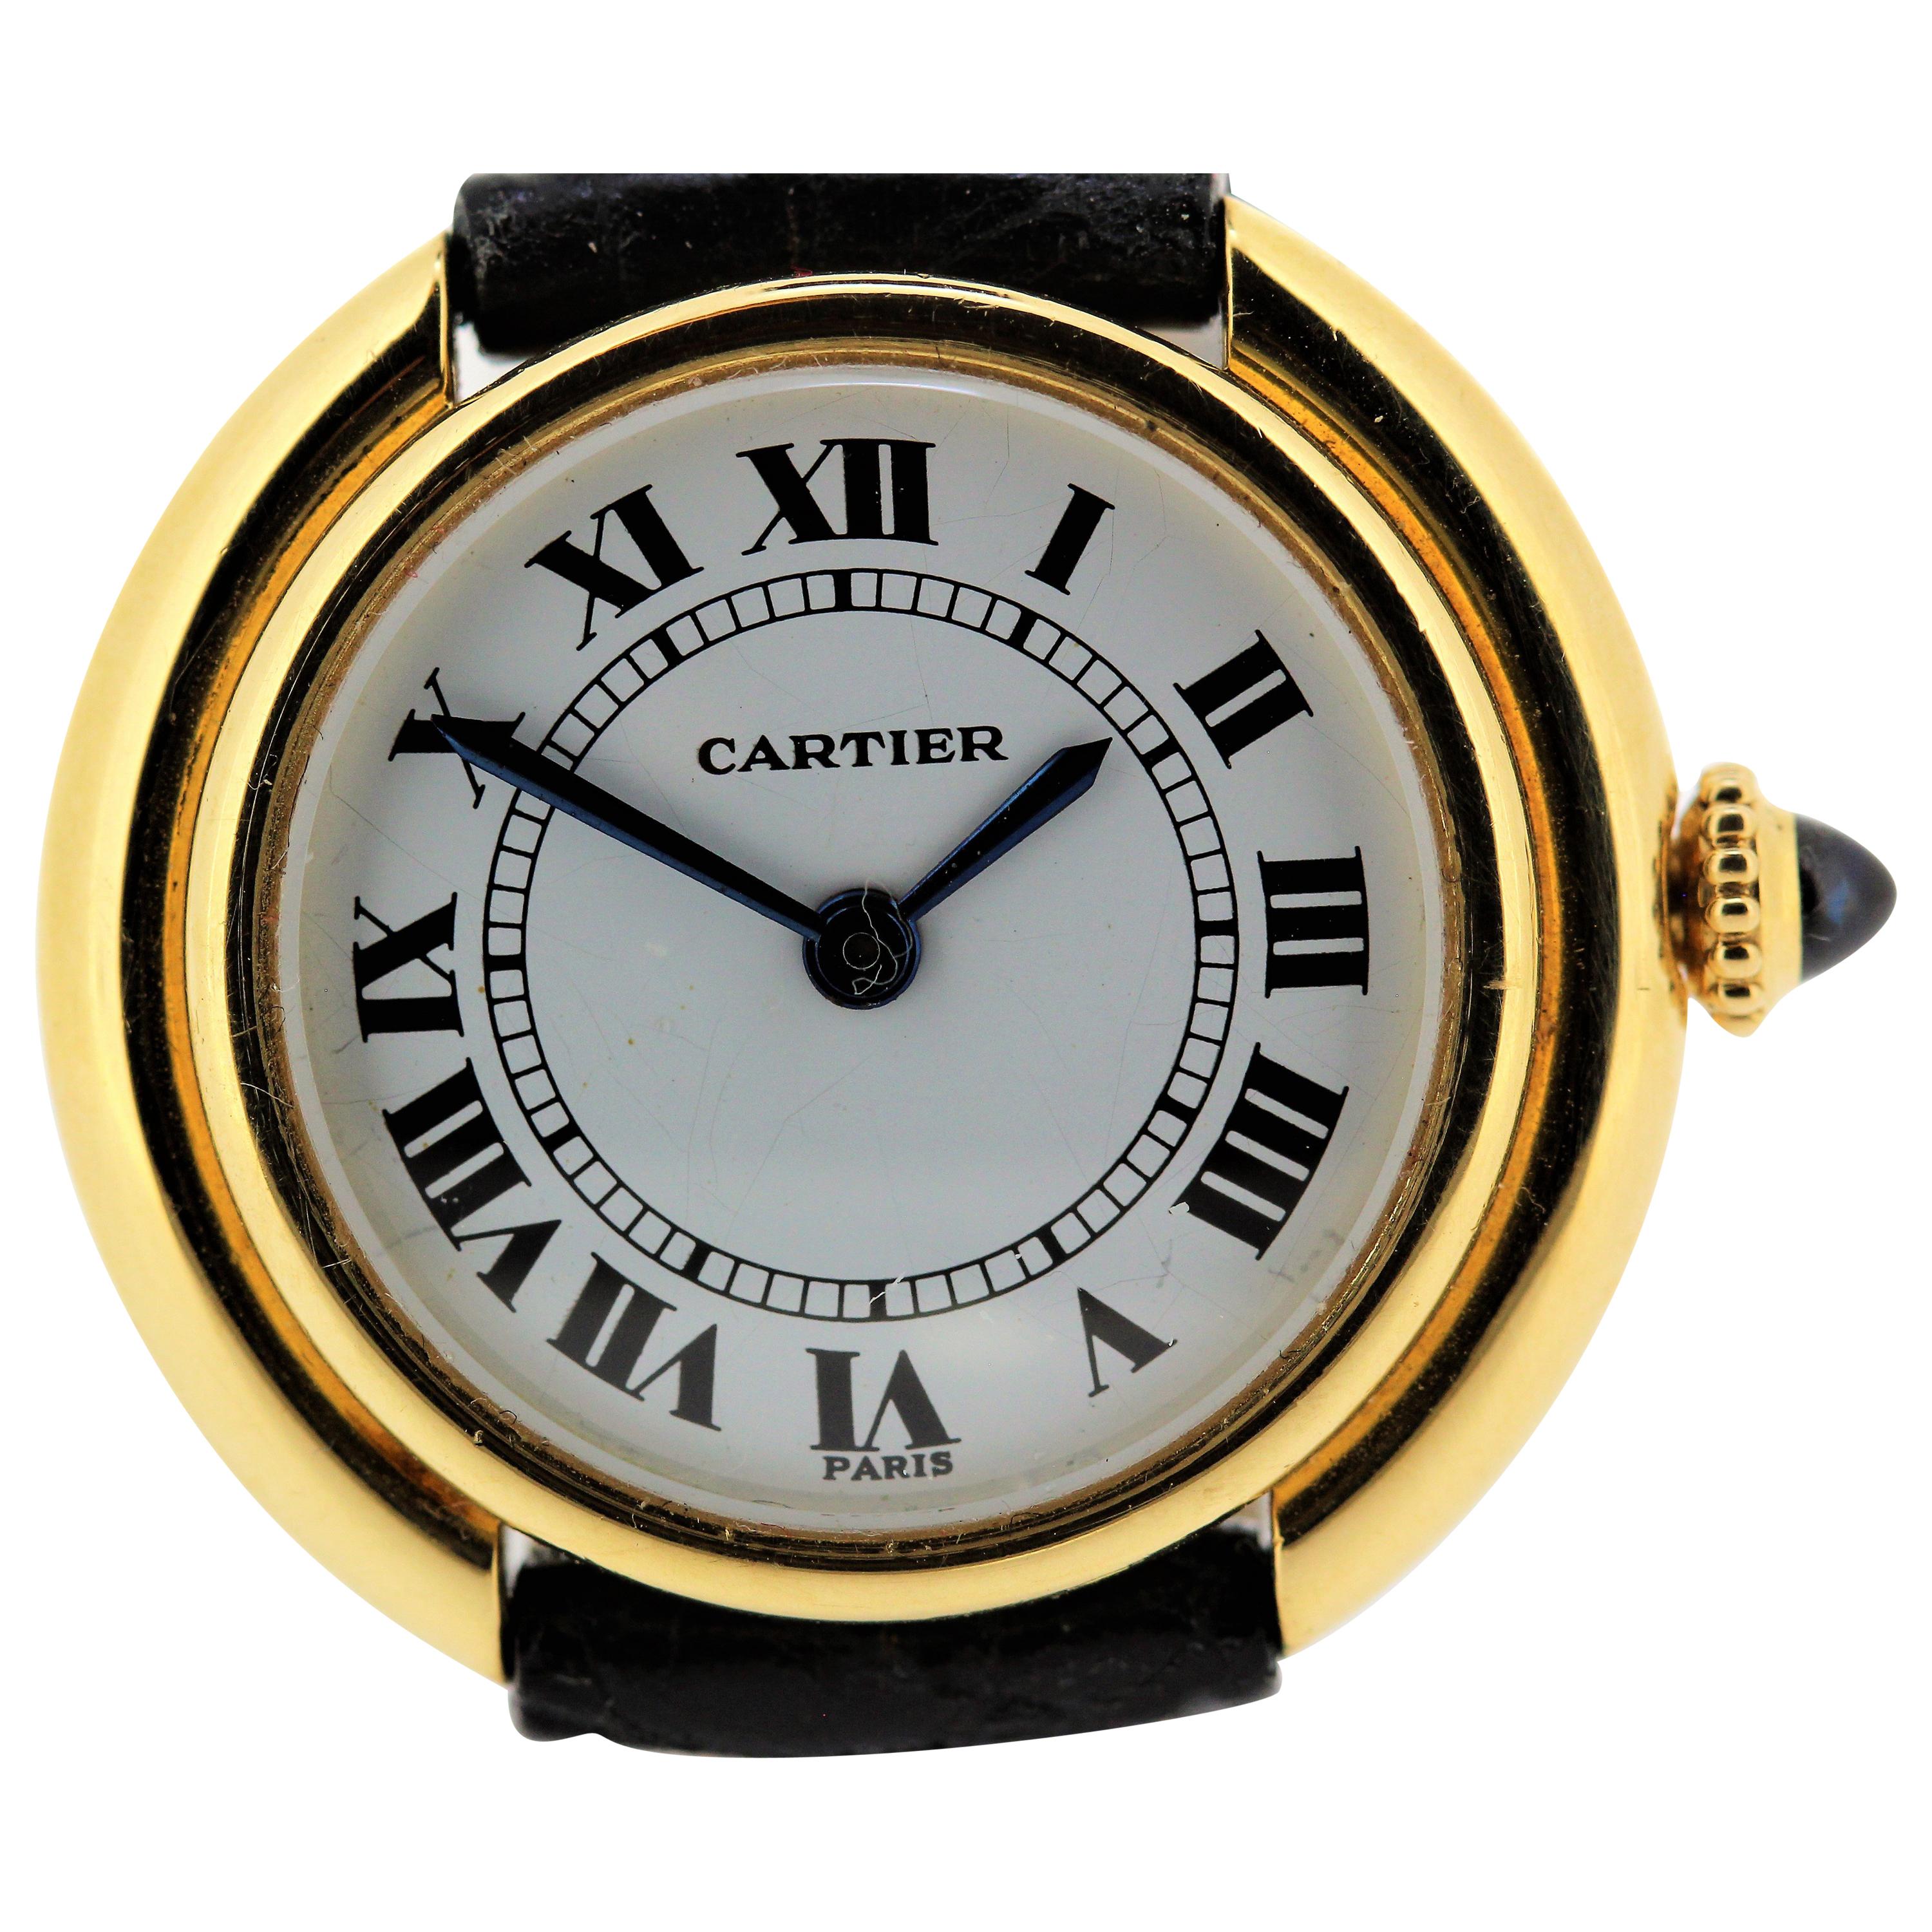 Vintage Cartier Paris Vendome Small Watch manual wind. Choice of Black or Roman  For Sale